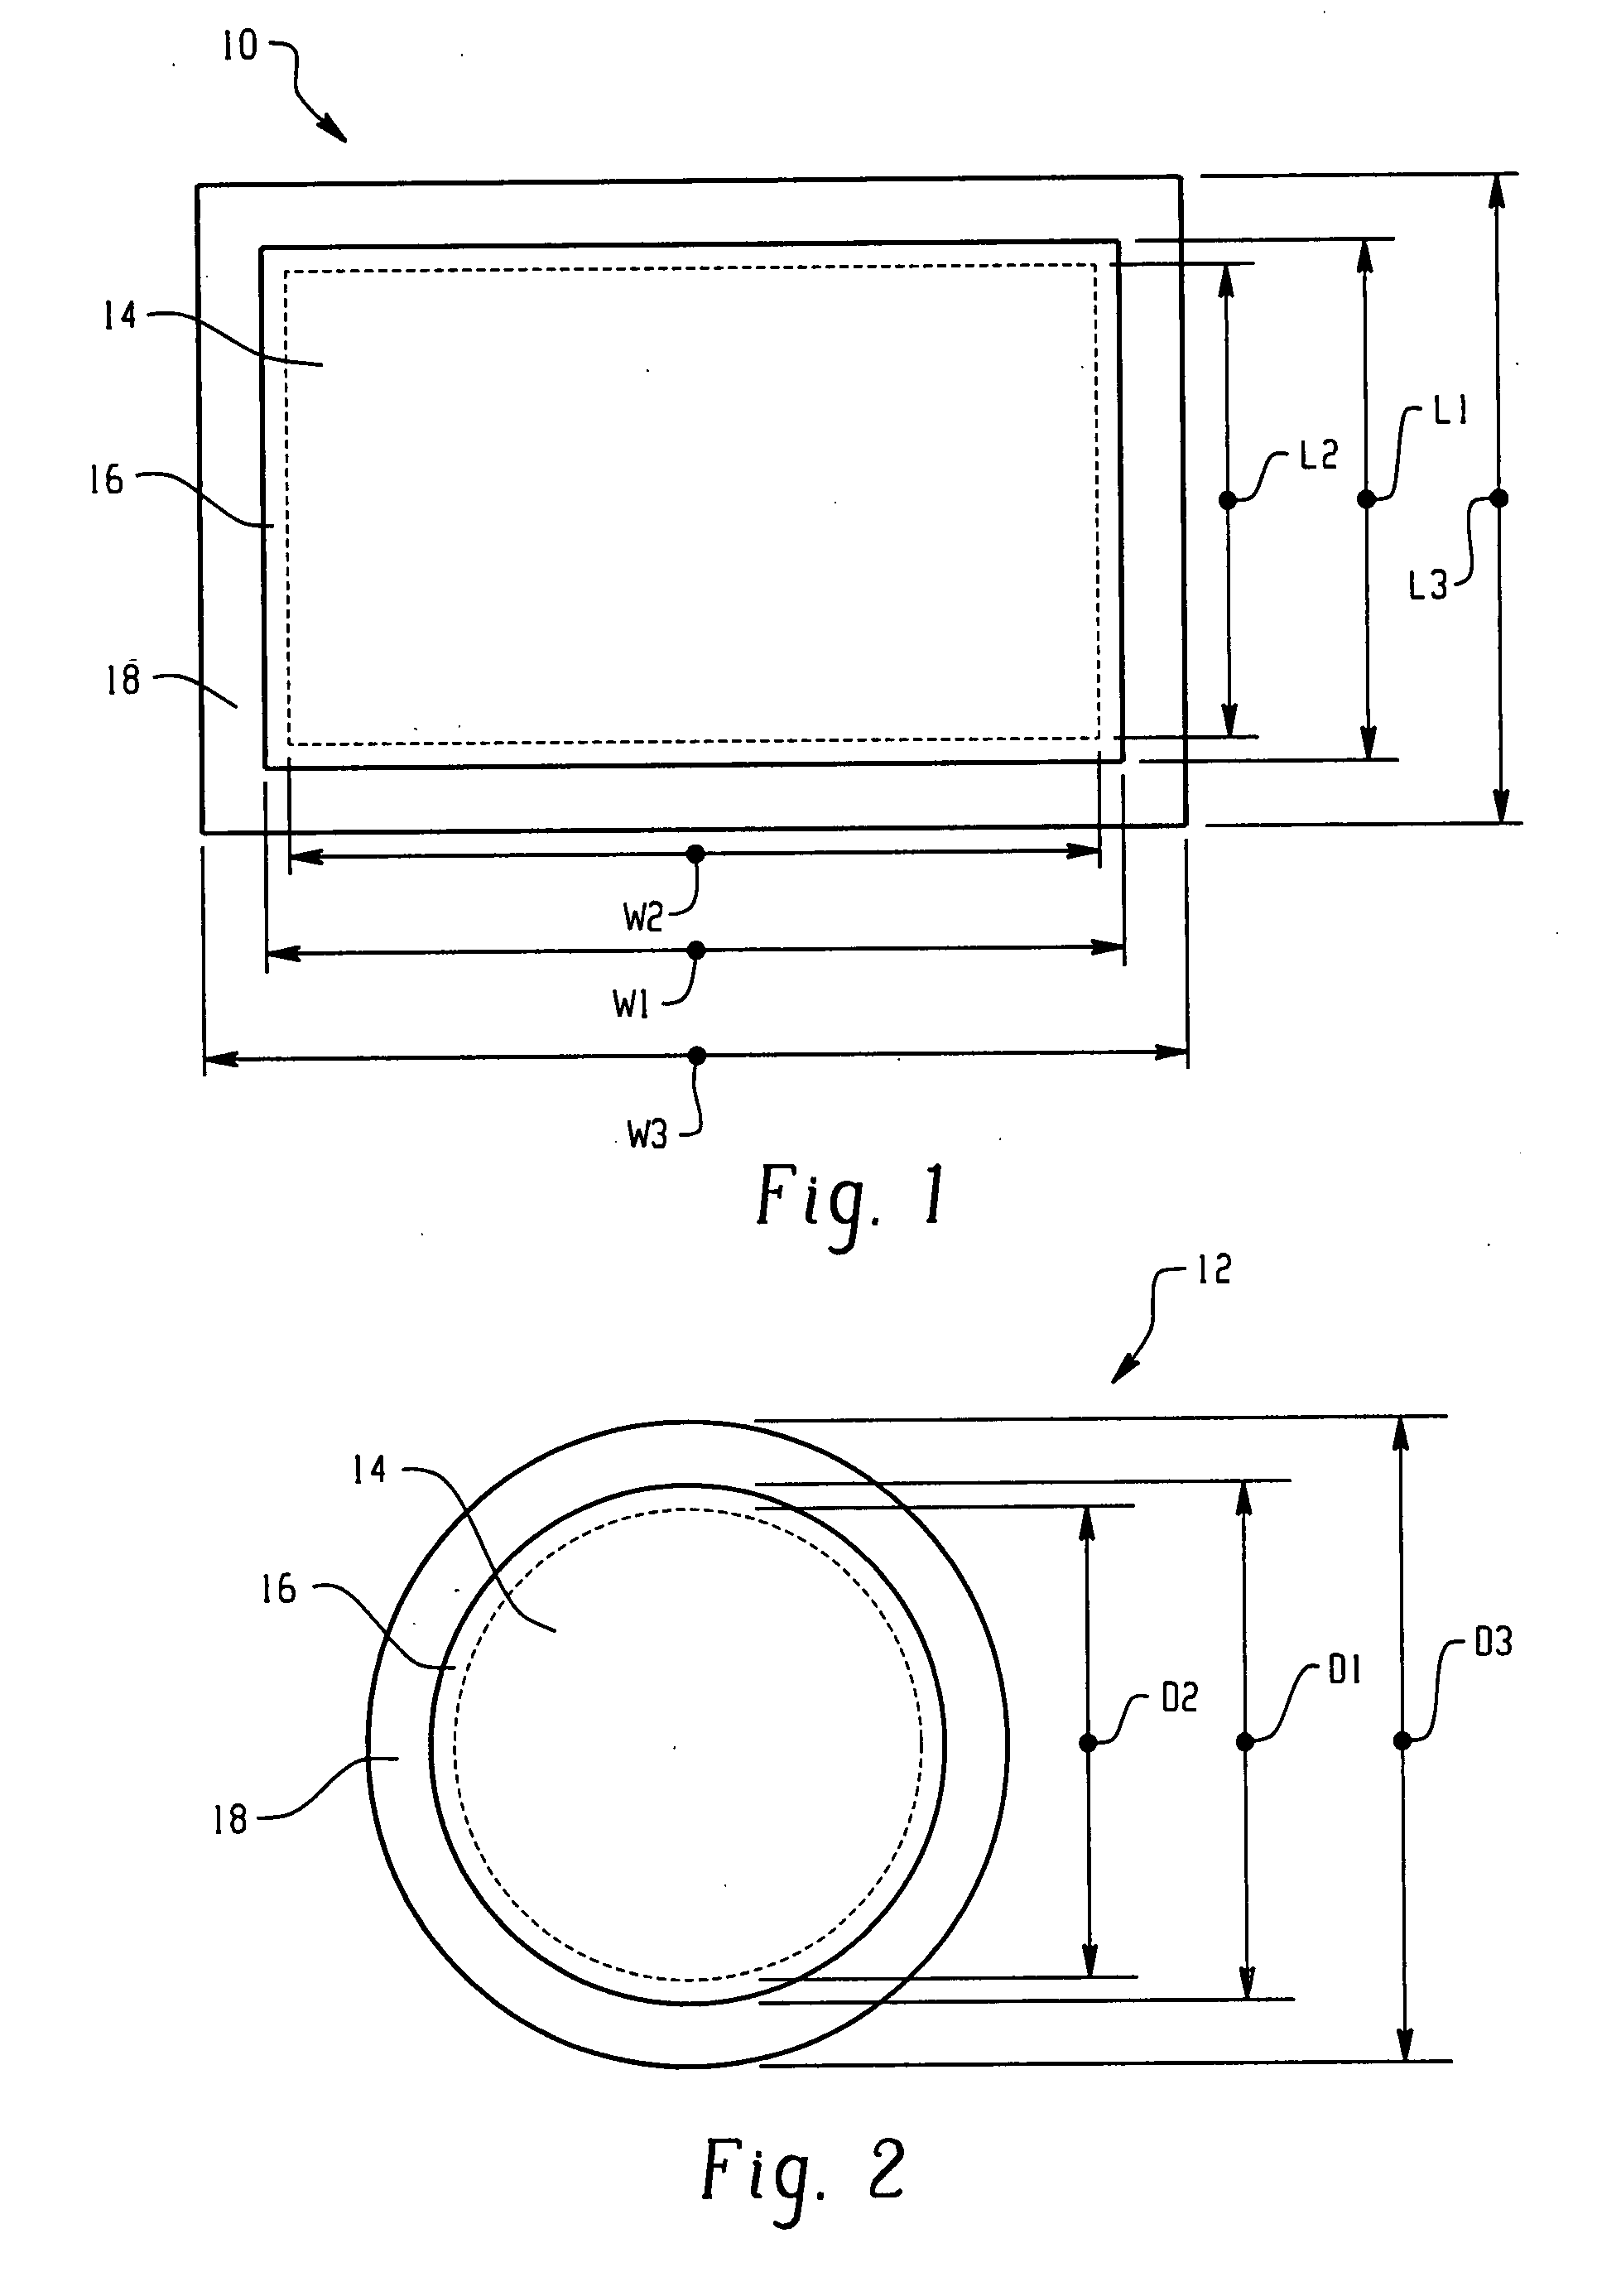 Method for manufacturing a solid uniform flood source for quality control of gamma imaging cameras